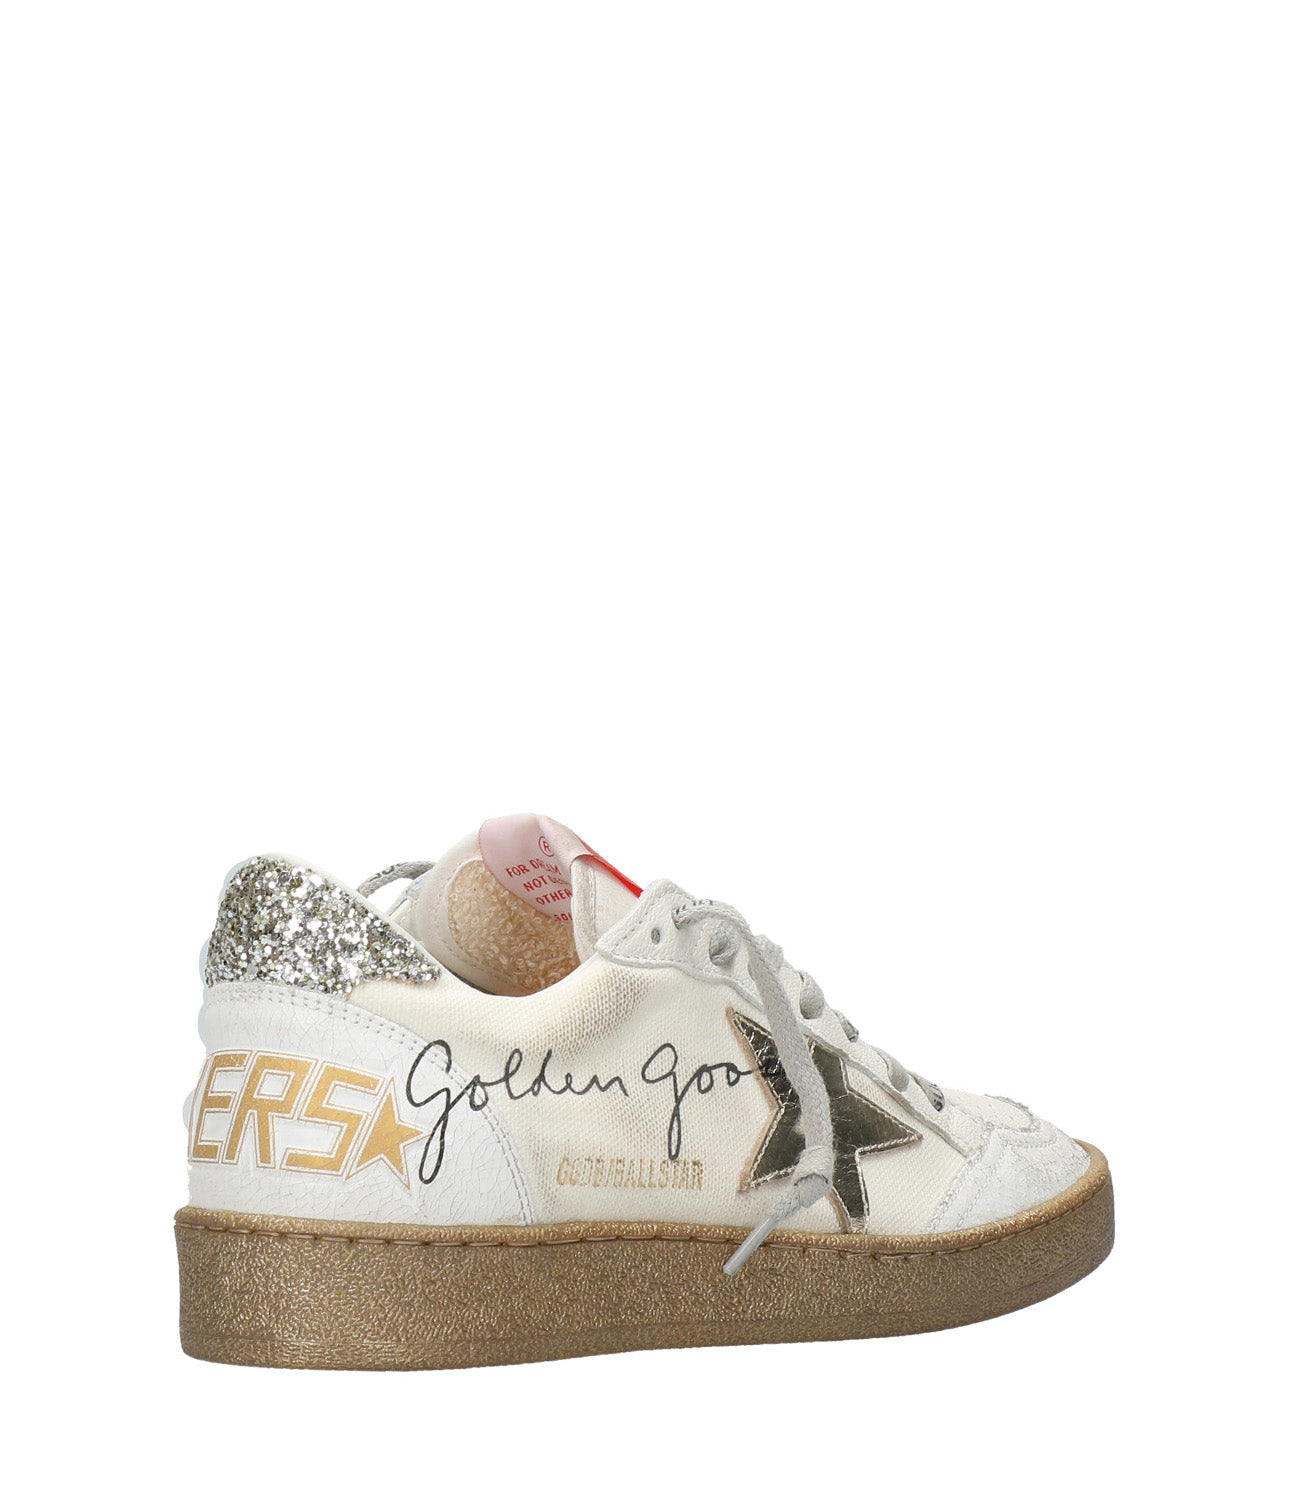 Golden Goose | Ball Star Sneakers White Cream and Gold